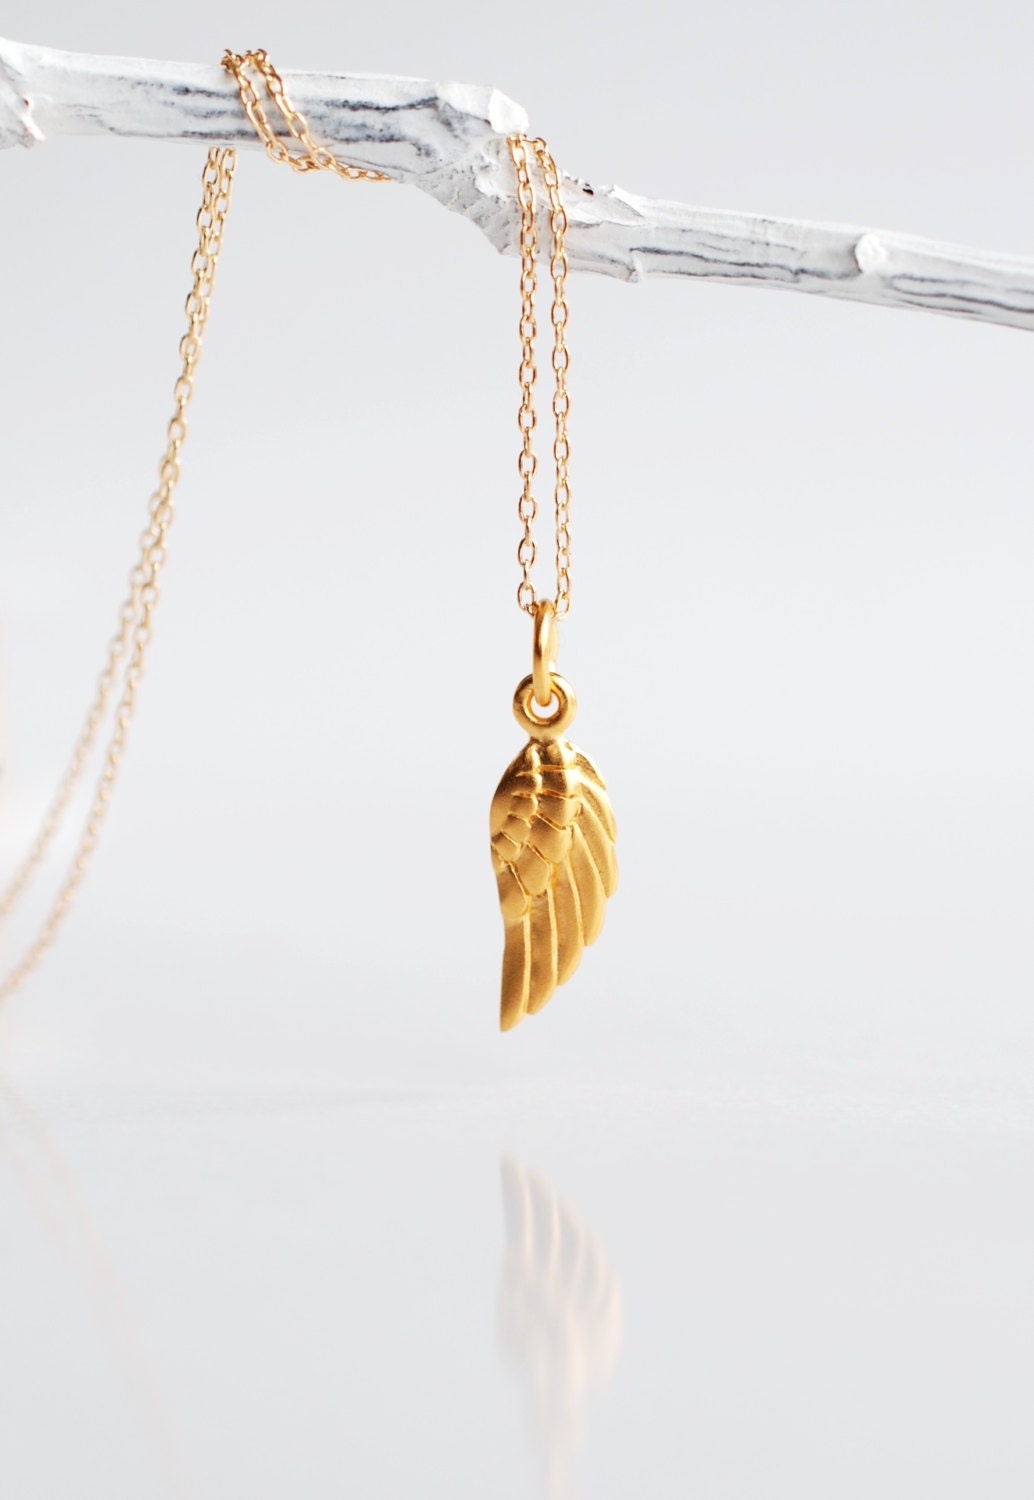 118 Angel Wing Necklace in Solid Bronze with 14K Gold Filled Chain - dainty minimalist jewelry by lustre